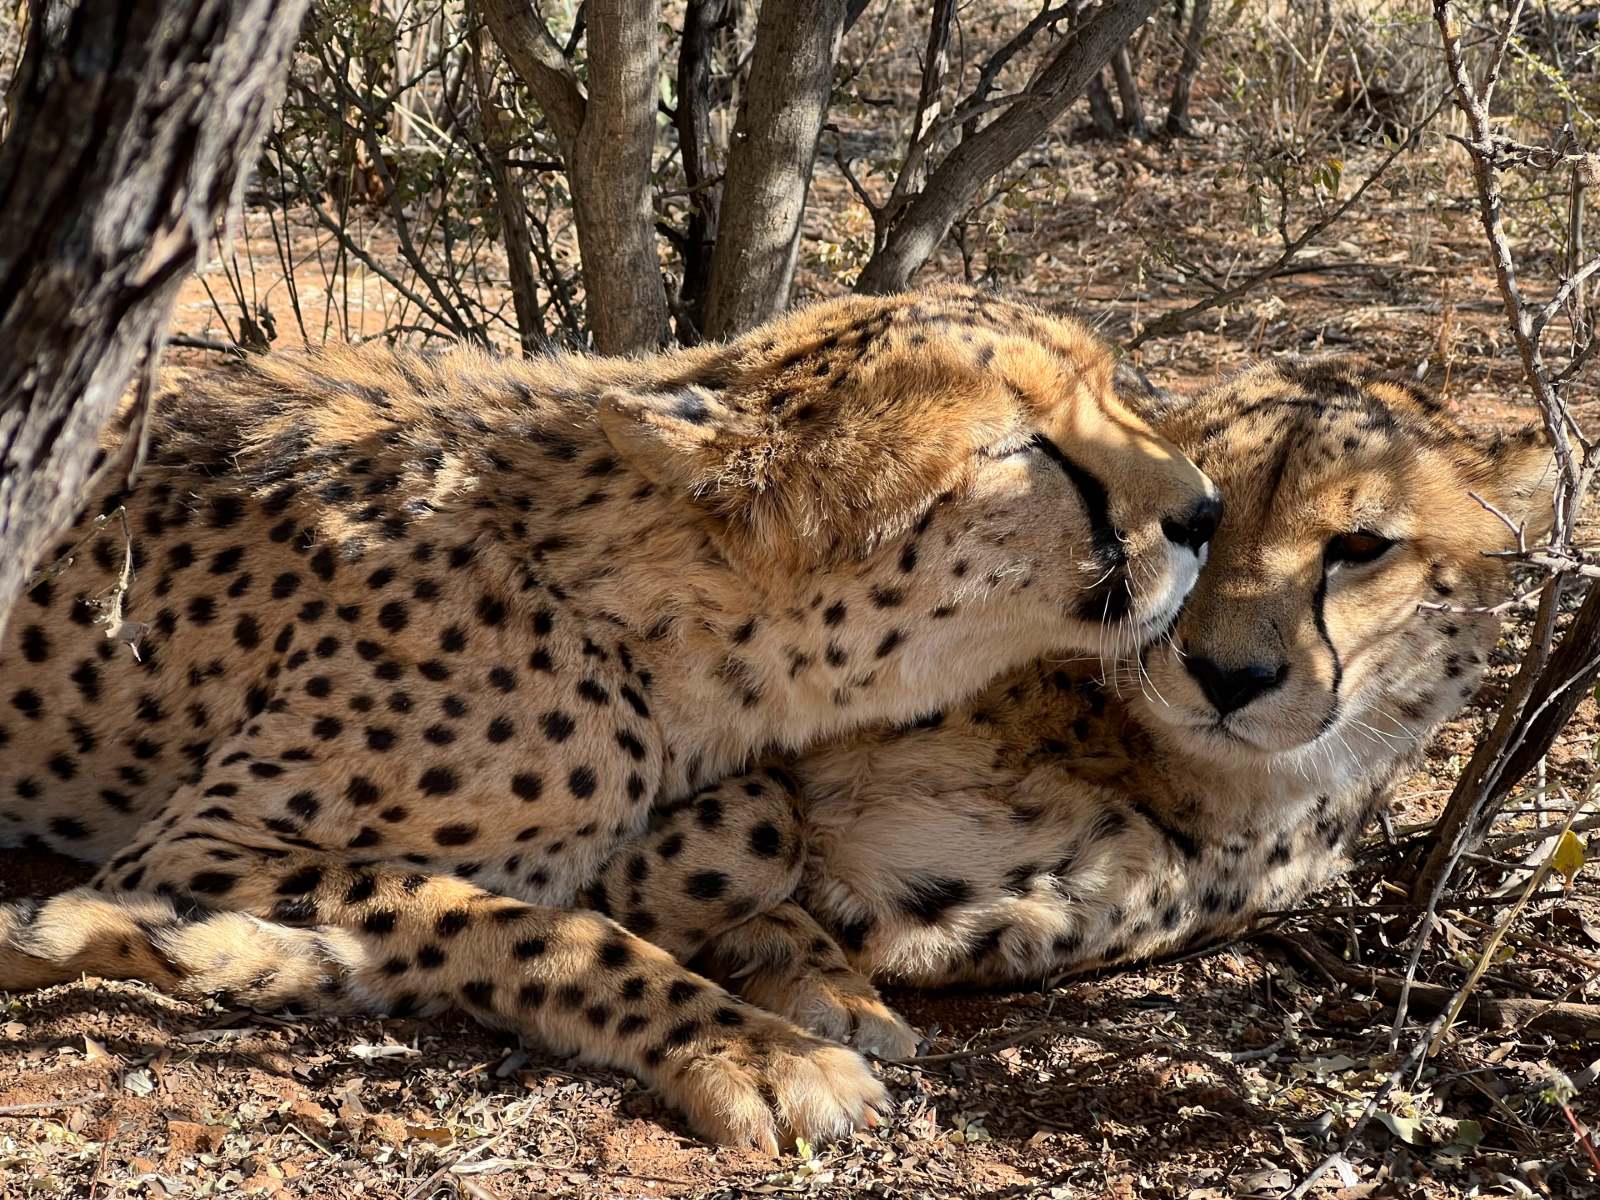 Two cheetahs laying together.